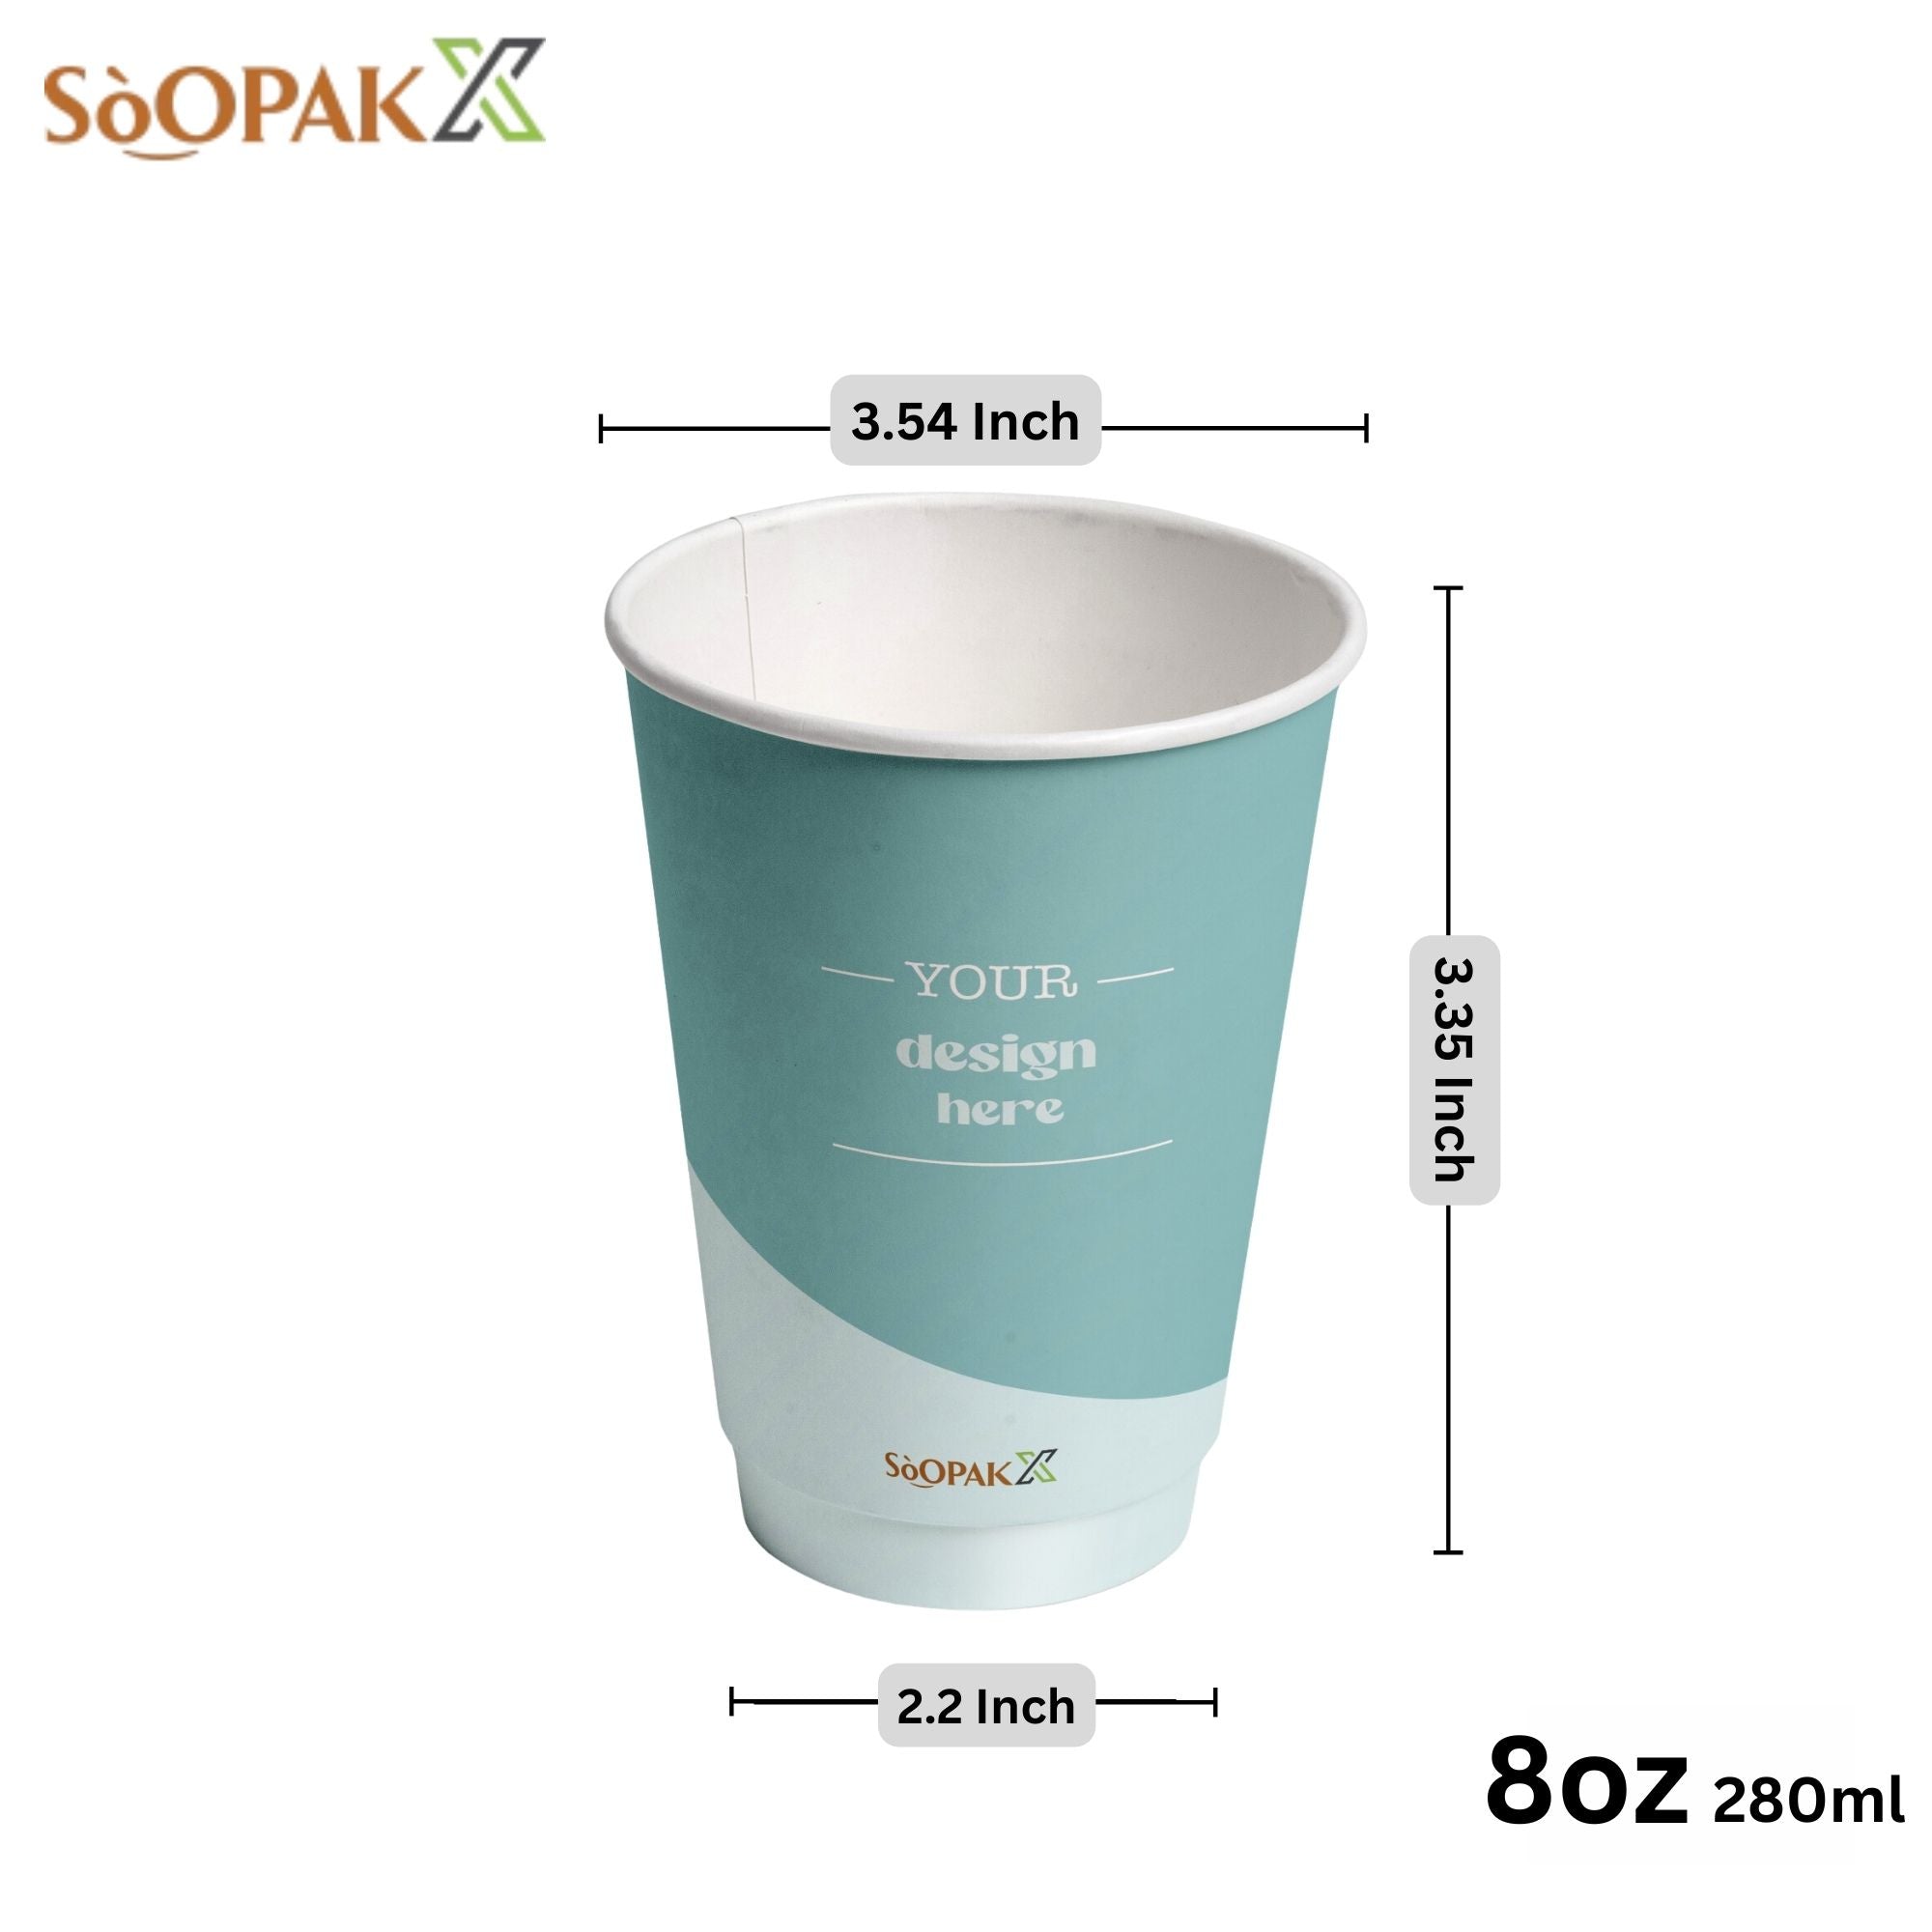 Single Wall Custom Coffee Paper Cup, avoid leaks, durable, warming, biodegradable, freshness, takeout, Packaging, easy visibility, food safe, avoid leaks, high-quality, dinnerware, Ecosmart, sustainable, coffee, tea, epitomize, biodegradable, renewable, hot chocolate, morning coffee, double-walled cups, freshness, takeout, Packaging, avoid spills, food safe, microwavable, elegance, dinnerware, strong, resilient, avoid leaks, restaurants, perfect choice, bulk pack, party cups, Leak Resistant